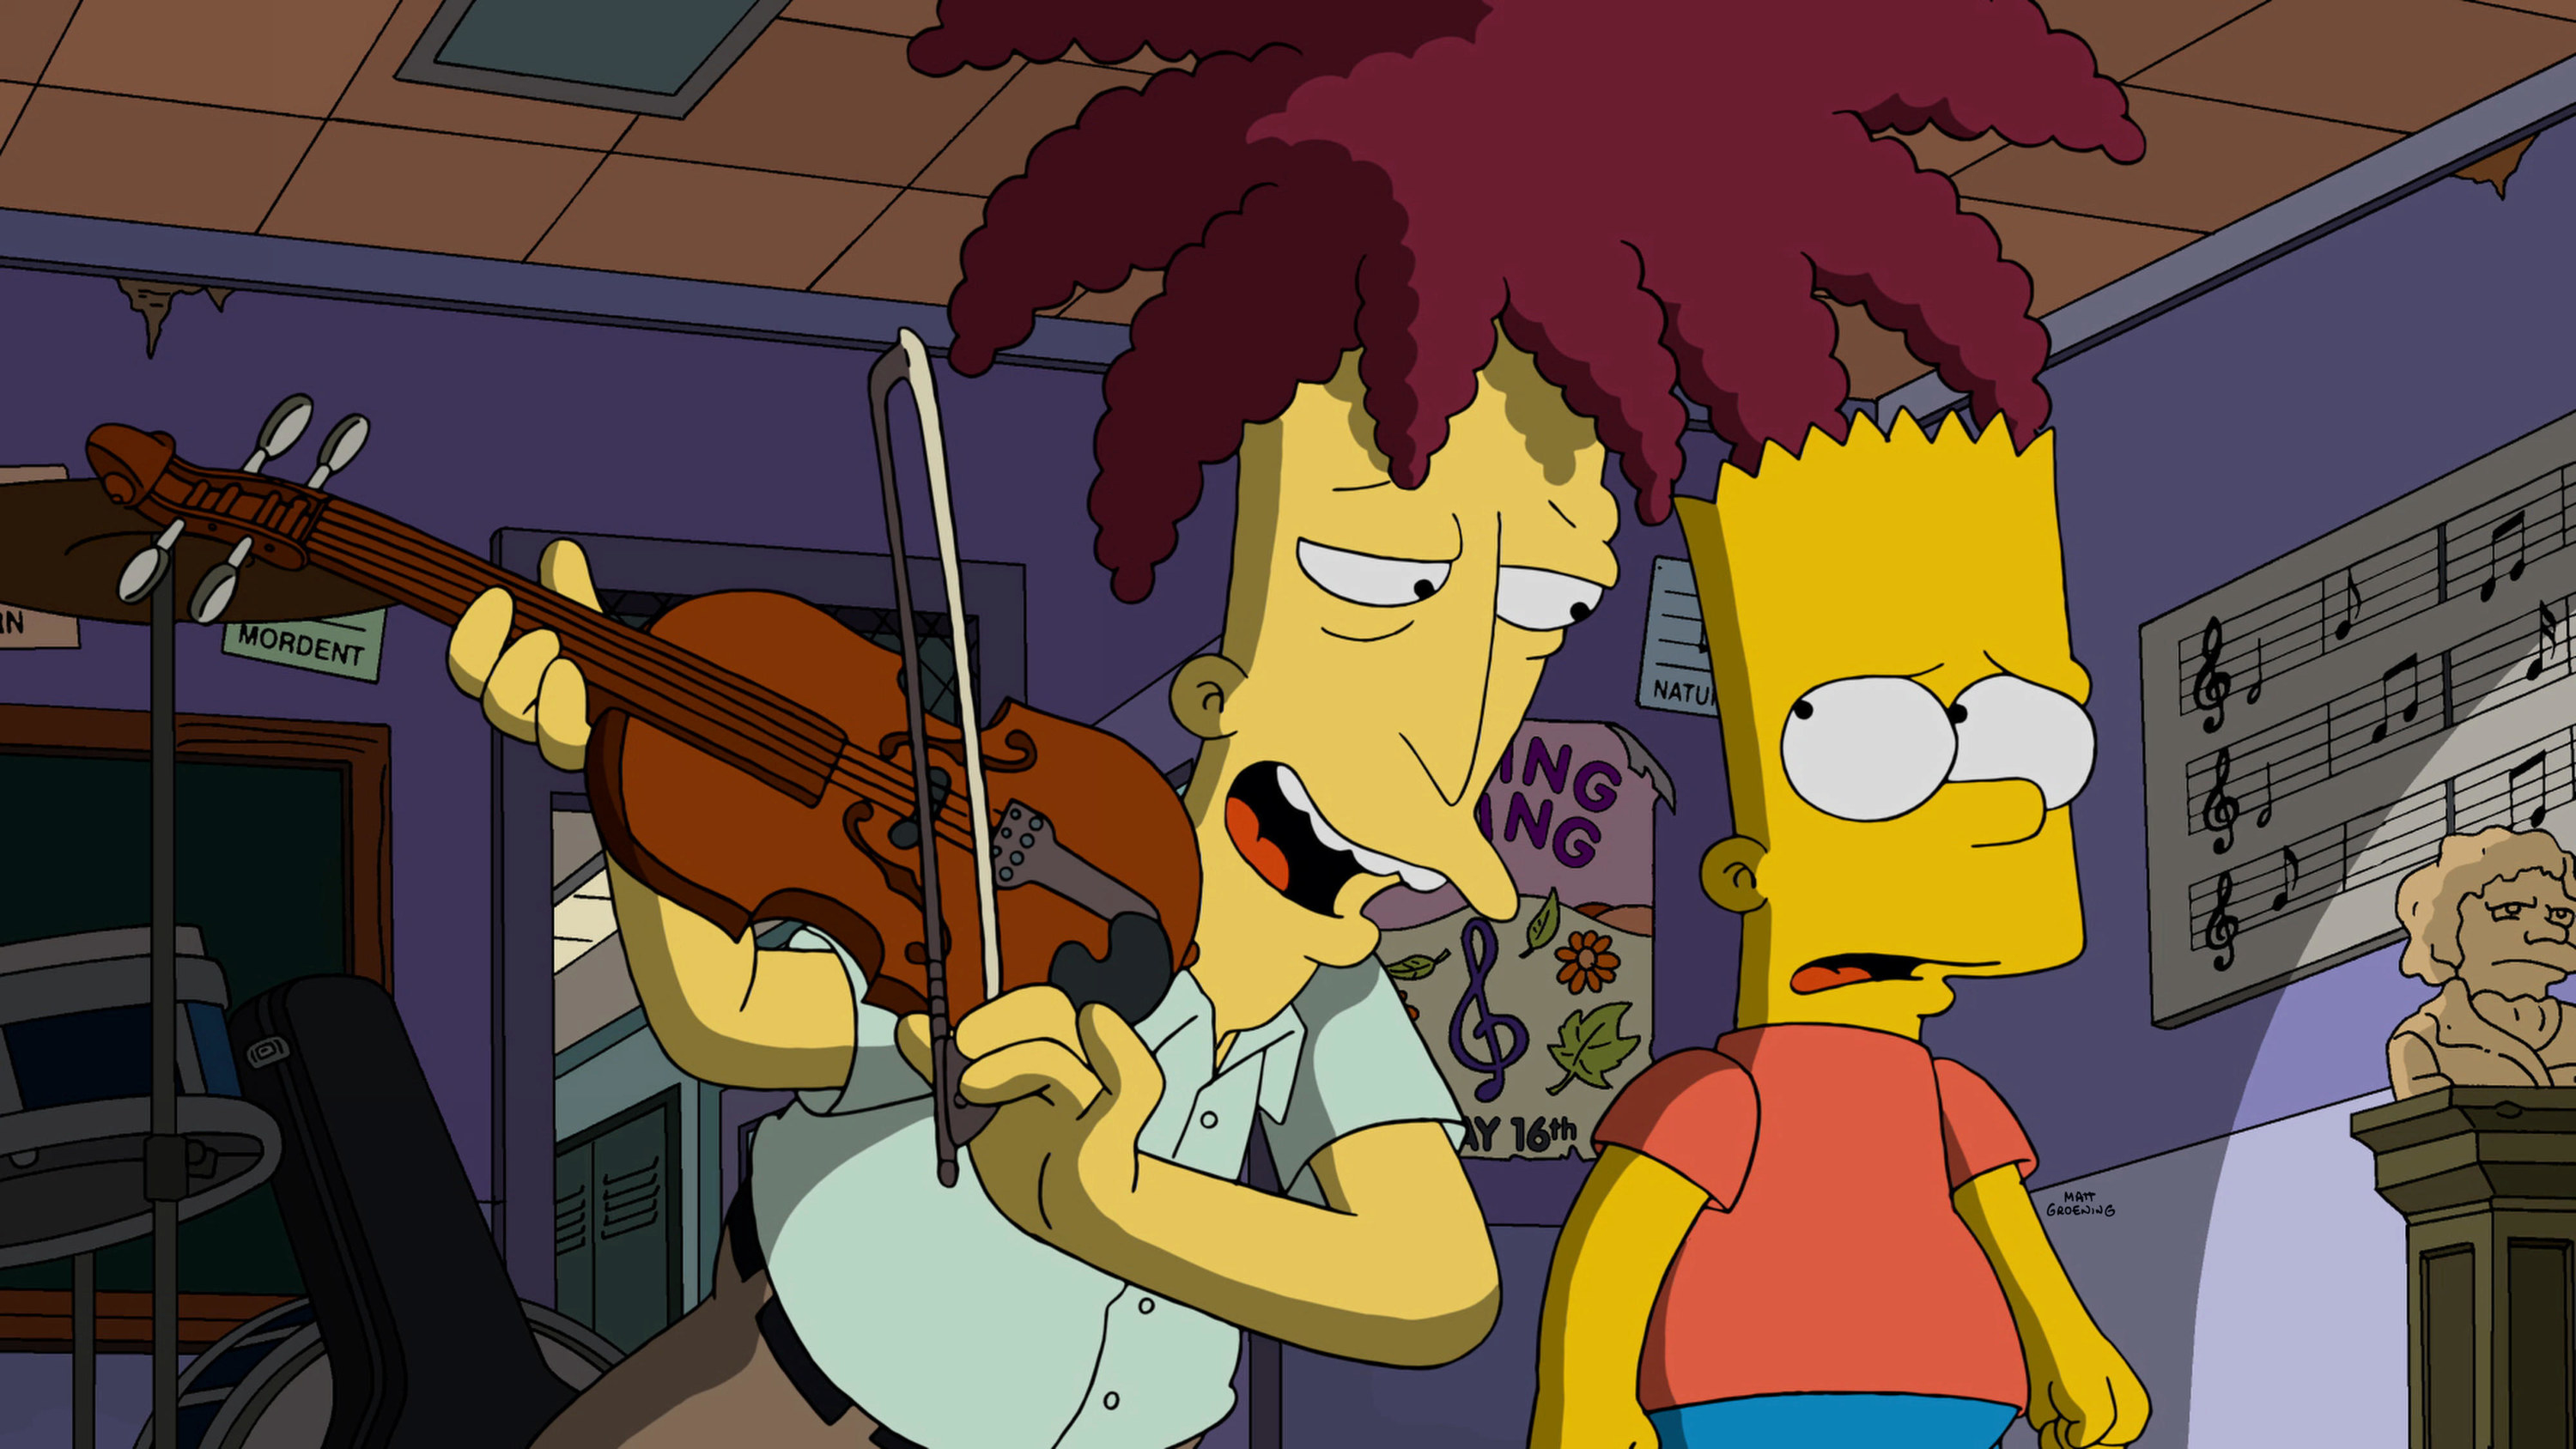 Sideshow Bob plays one final song for Bart Simpson jn “Treehouse of Horror XXVI”